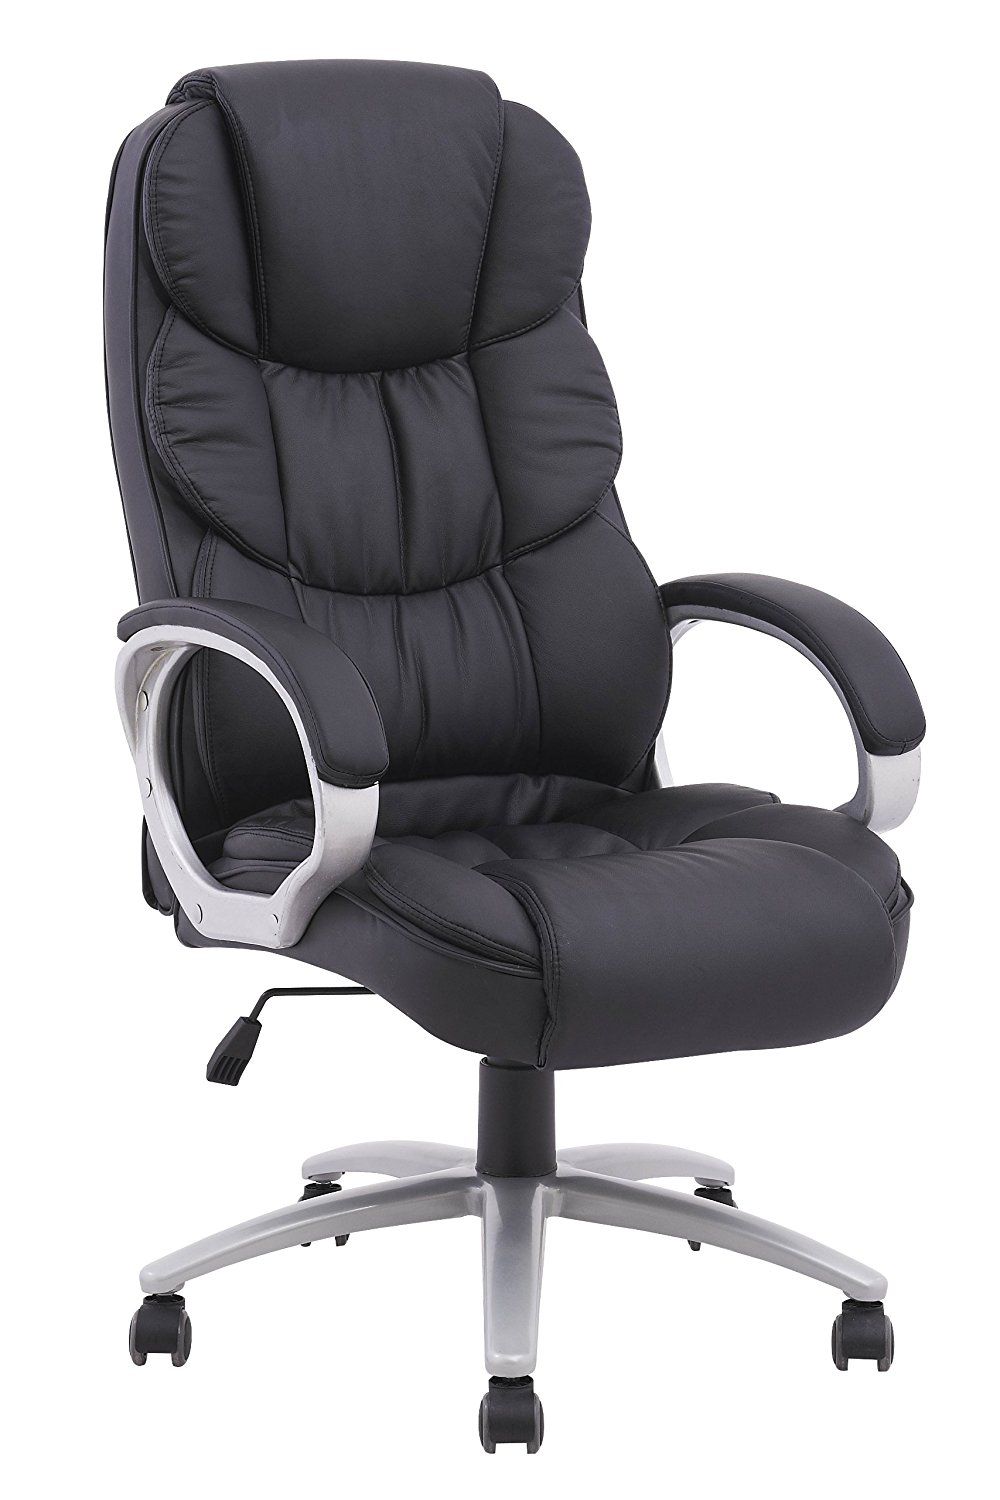 Choosing The Perfect Home Office Chair Dubai For You